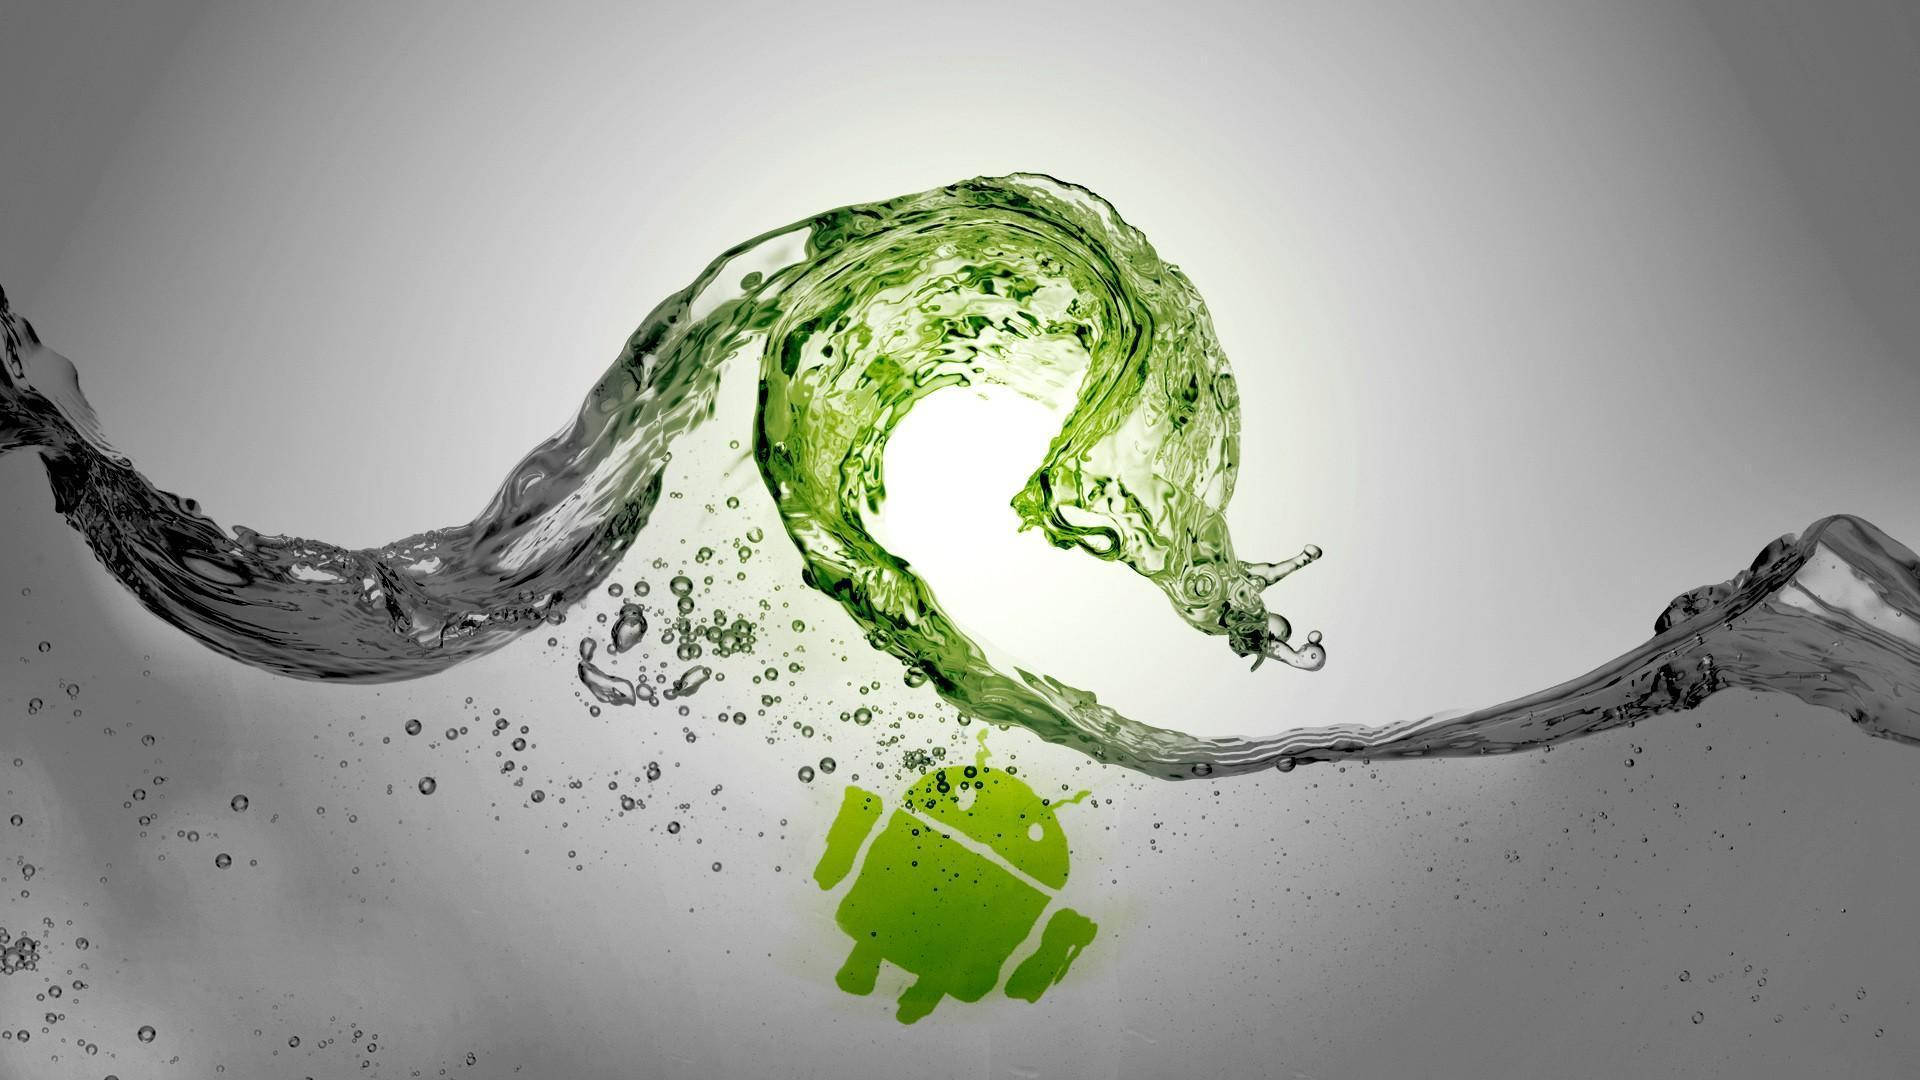 “The Android Robot Rides the Wave of the Future” Wallpaper